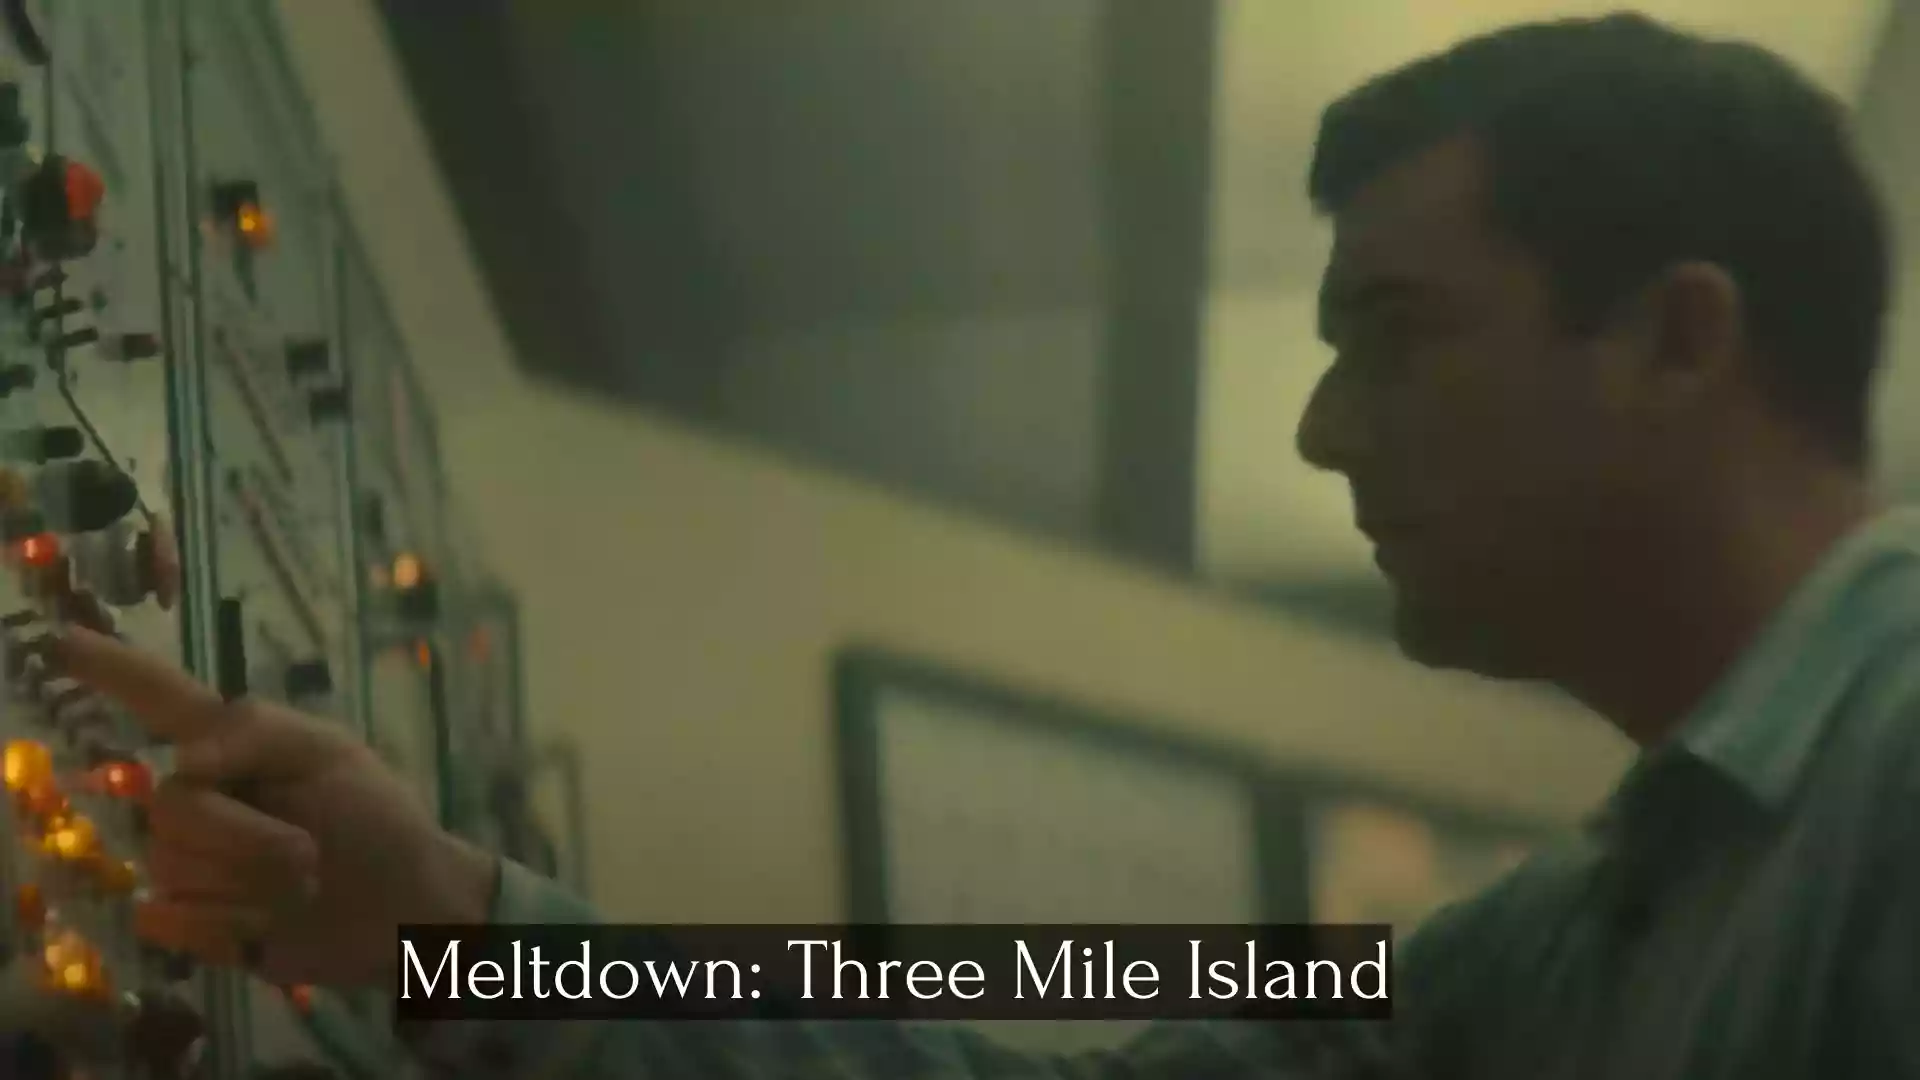 Meltdown: Three Mile Island Wallpaper and Images